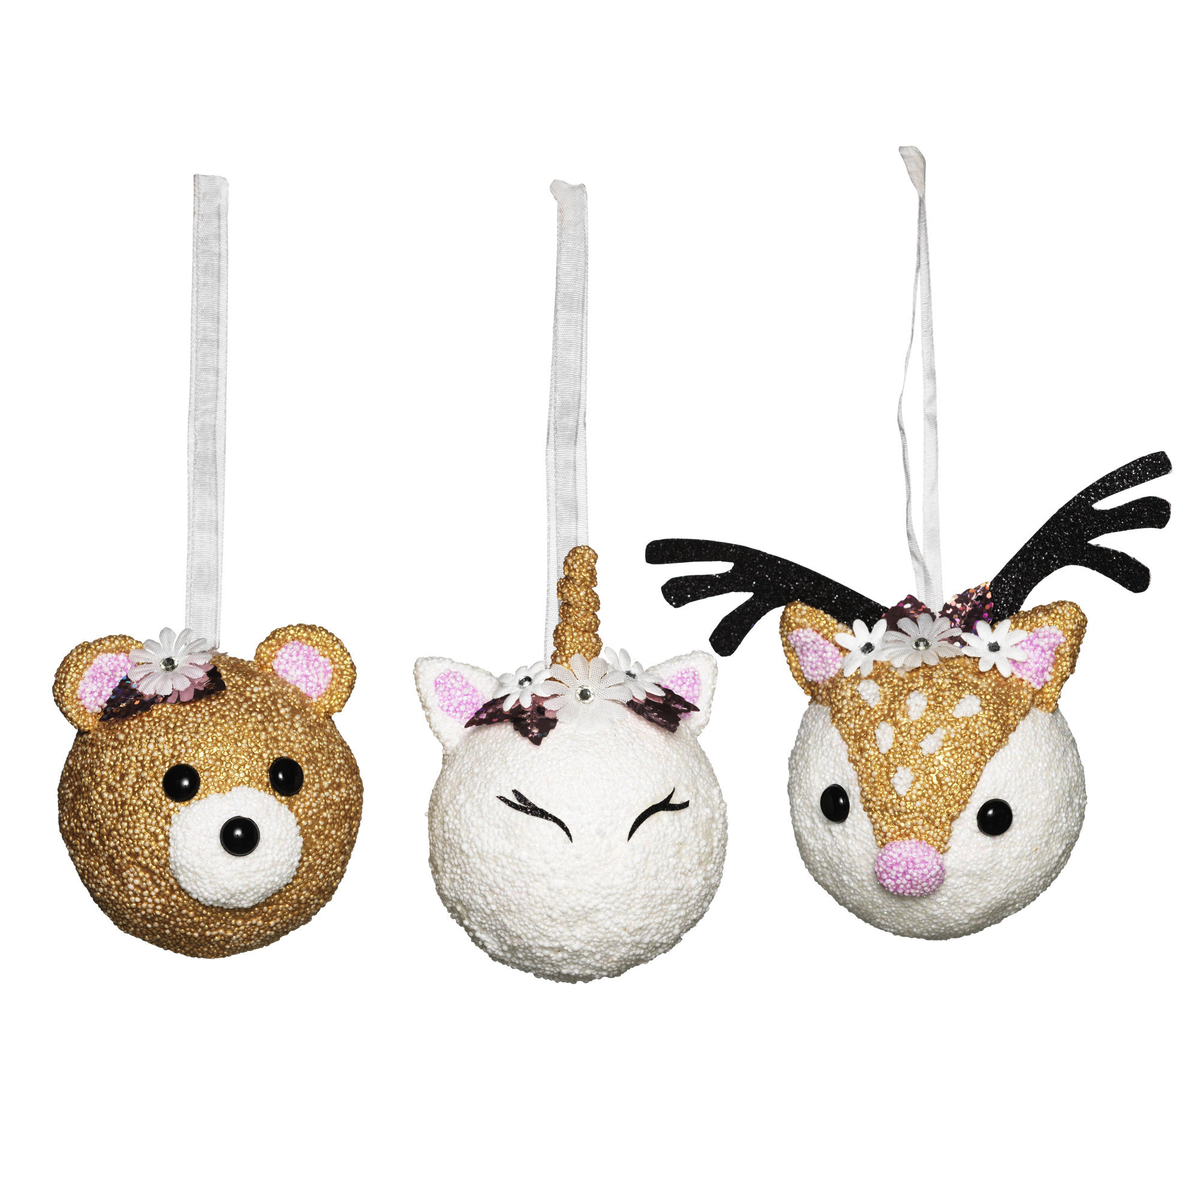 DIY-KIT PEARLY ANIMAL BAUBLES